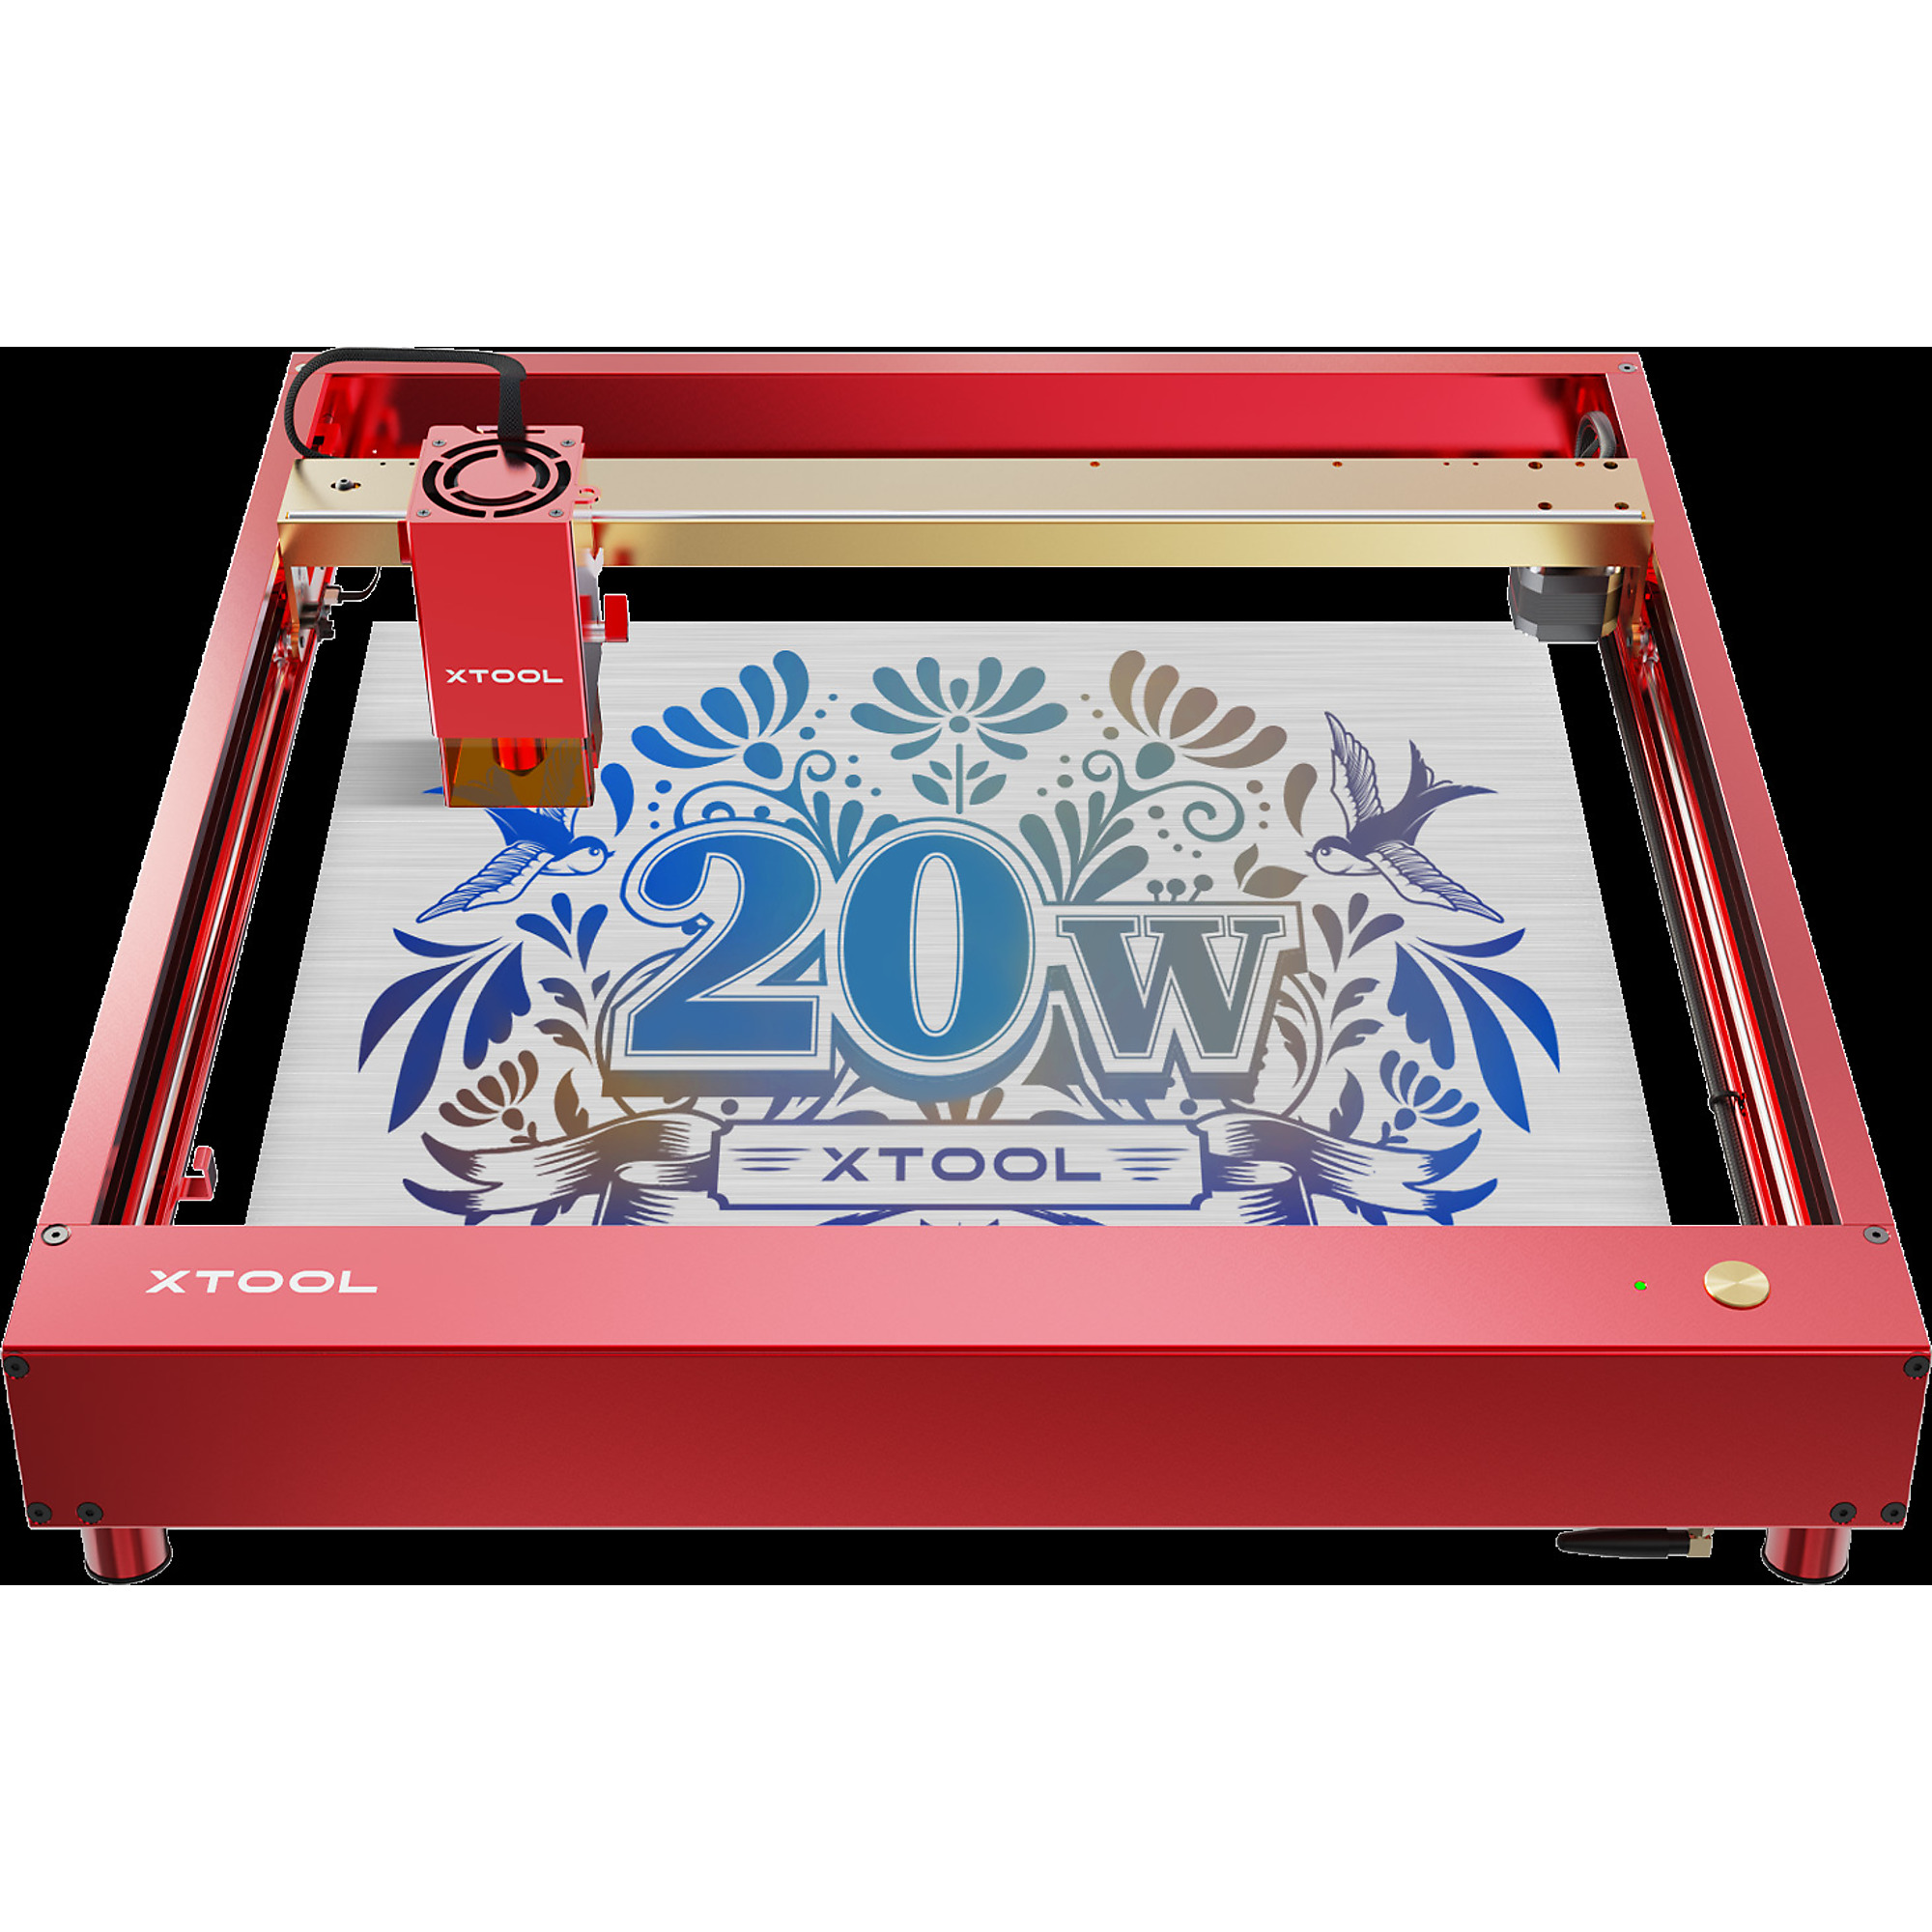 xTool, Laser Cutter and Engraver, 20w, 400mm/s, Model, Working Width 14.57 in, Working Length 31.89 in, Laser Power 20 W, Model P1030296